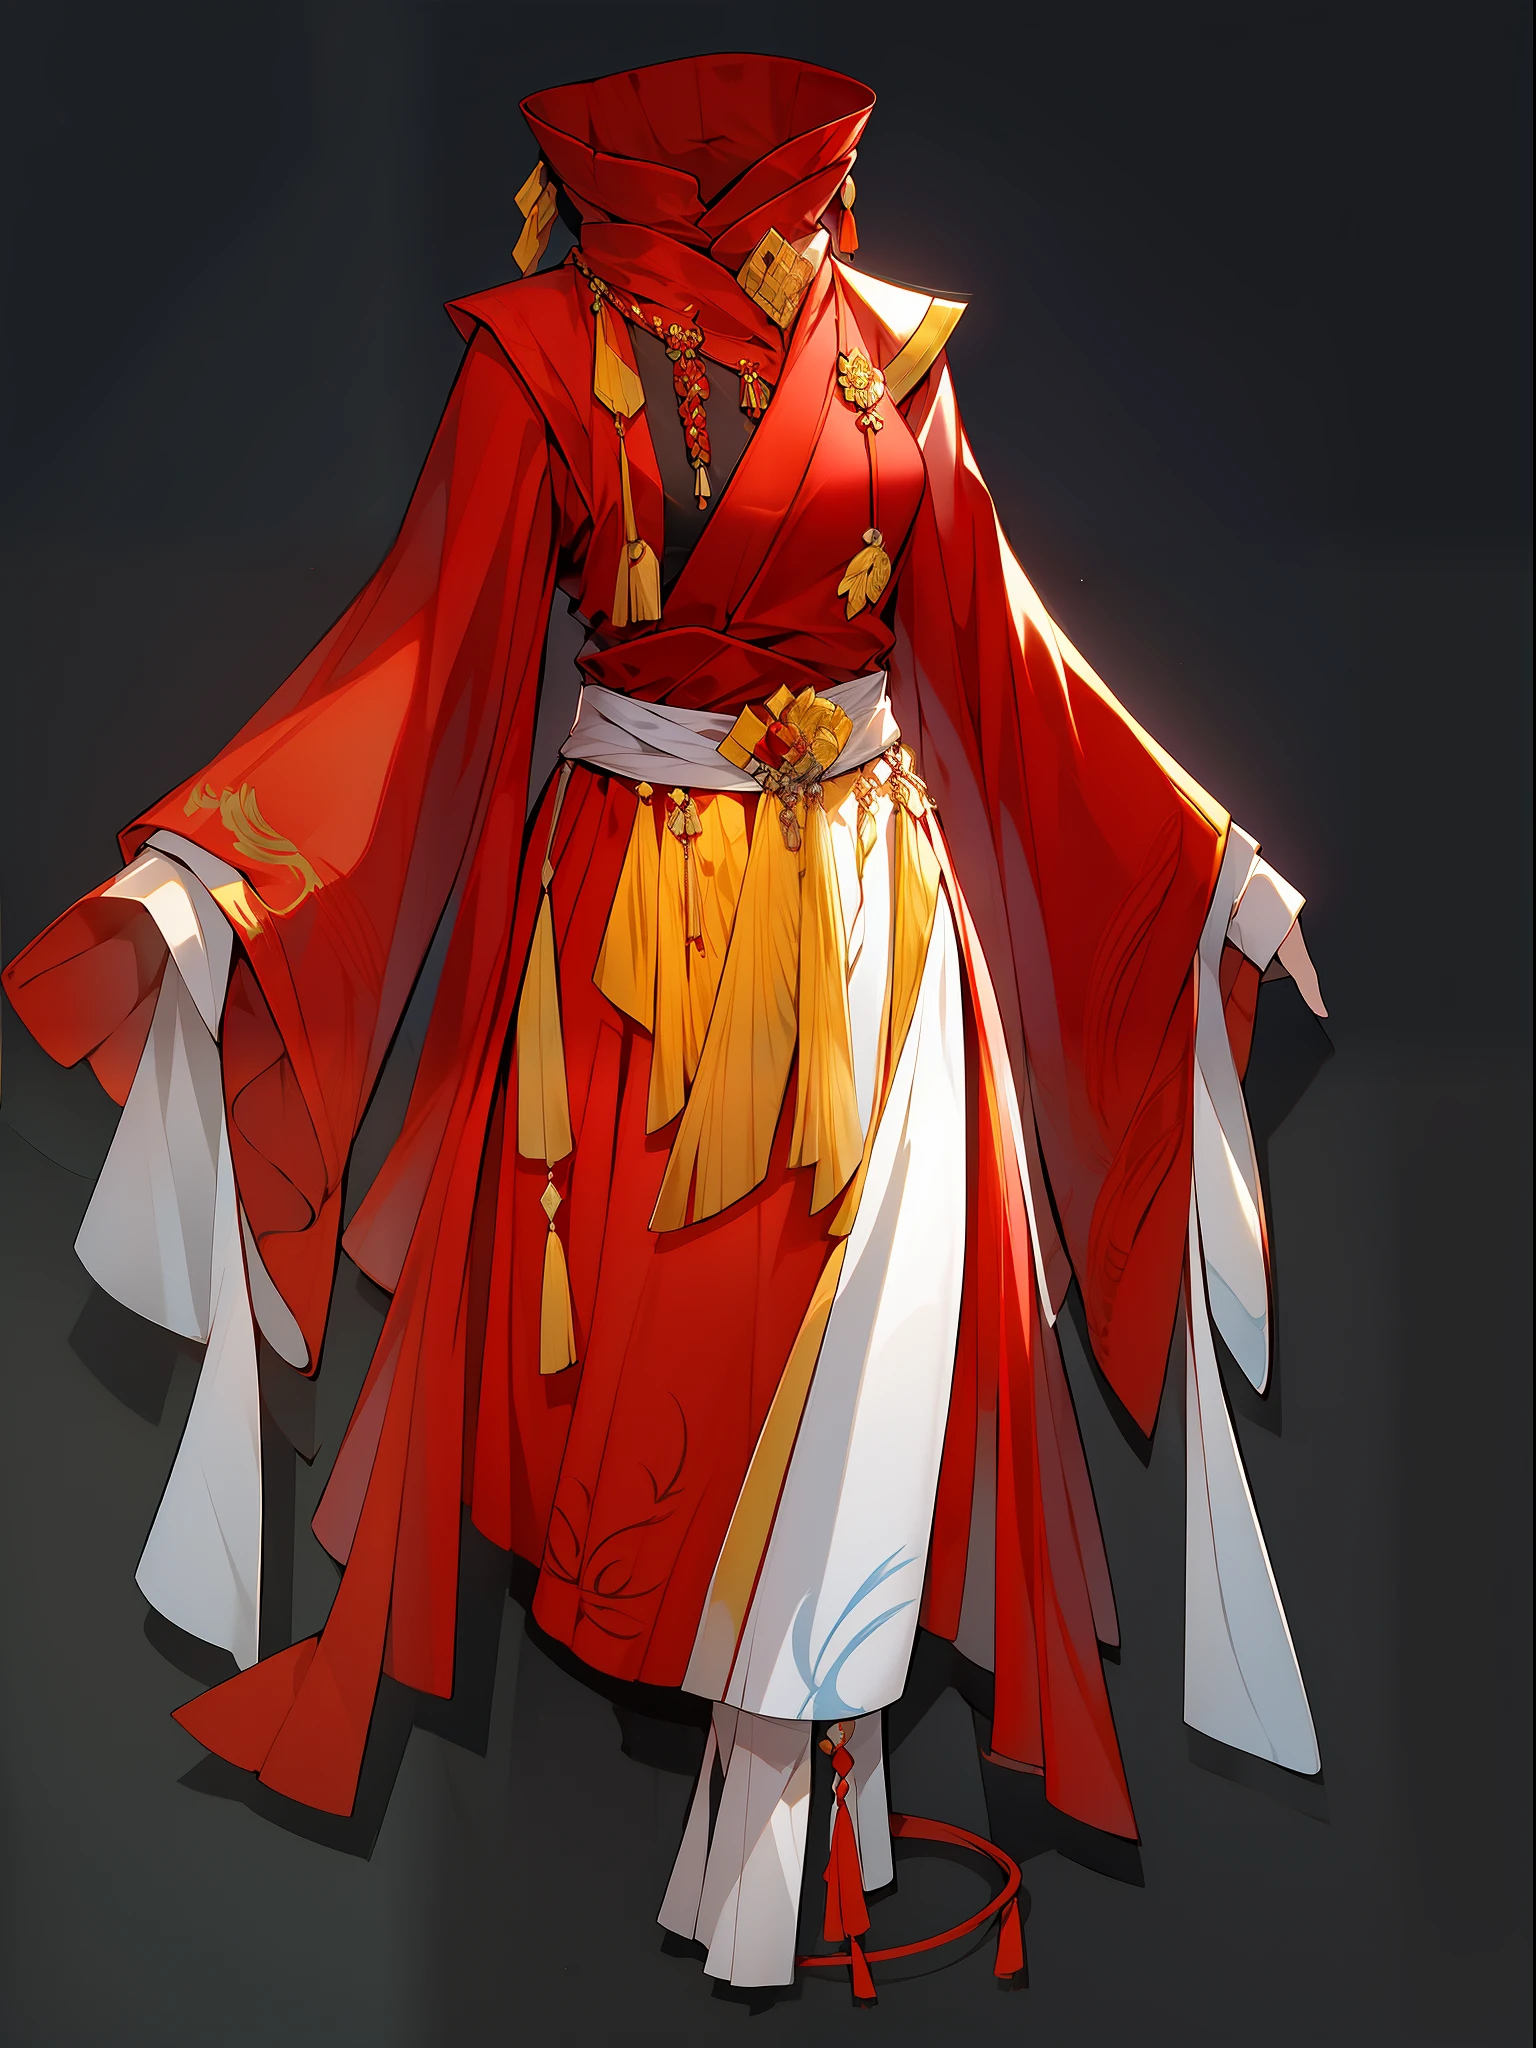 （NOhumans：1.5），（clothing design）， masterpaintings， Ultimate，（a color），Ancient Chinese clothes，Western Regions dancer costume，gossamer，gold chains，red color Hanfu，Phnom Penh embroidery，gameicon，